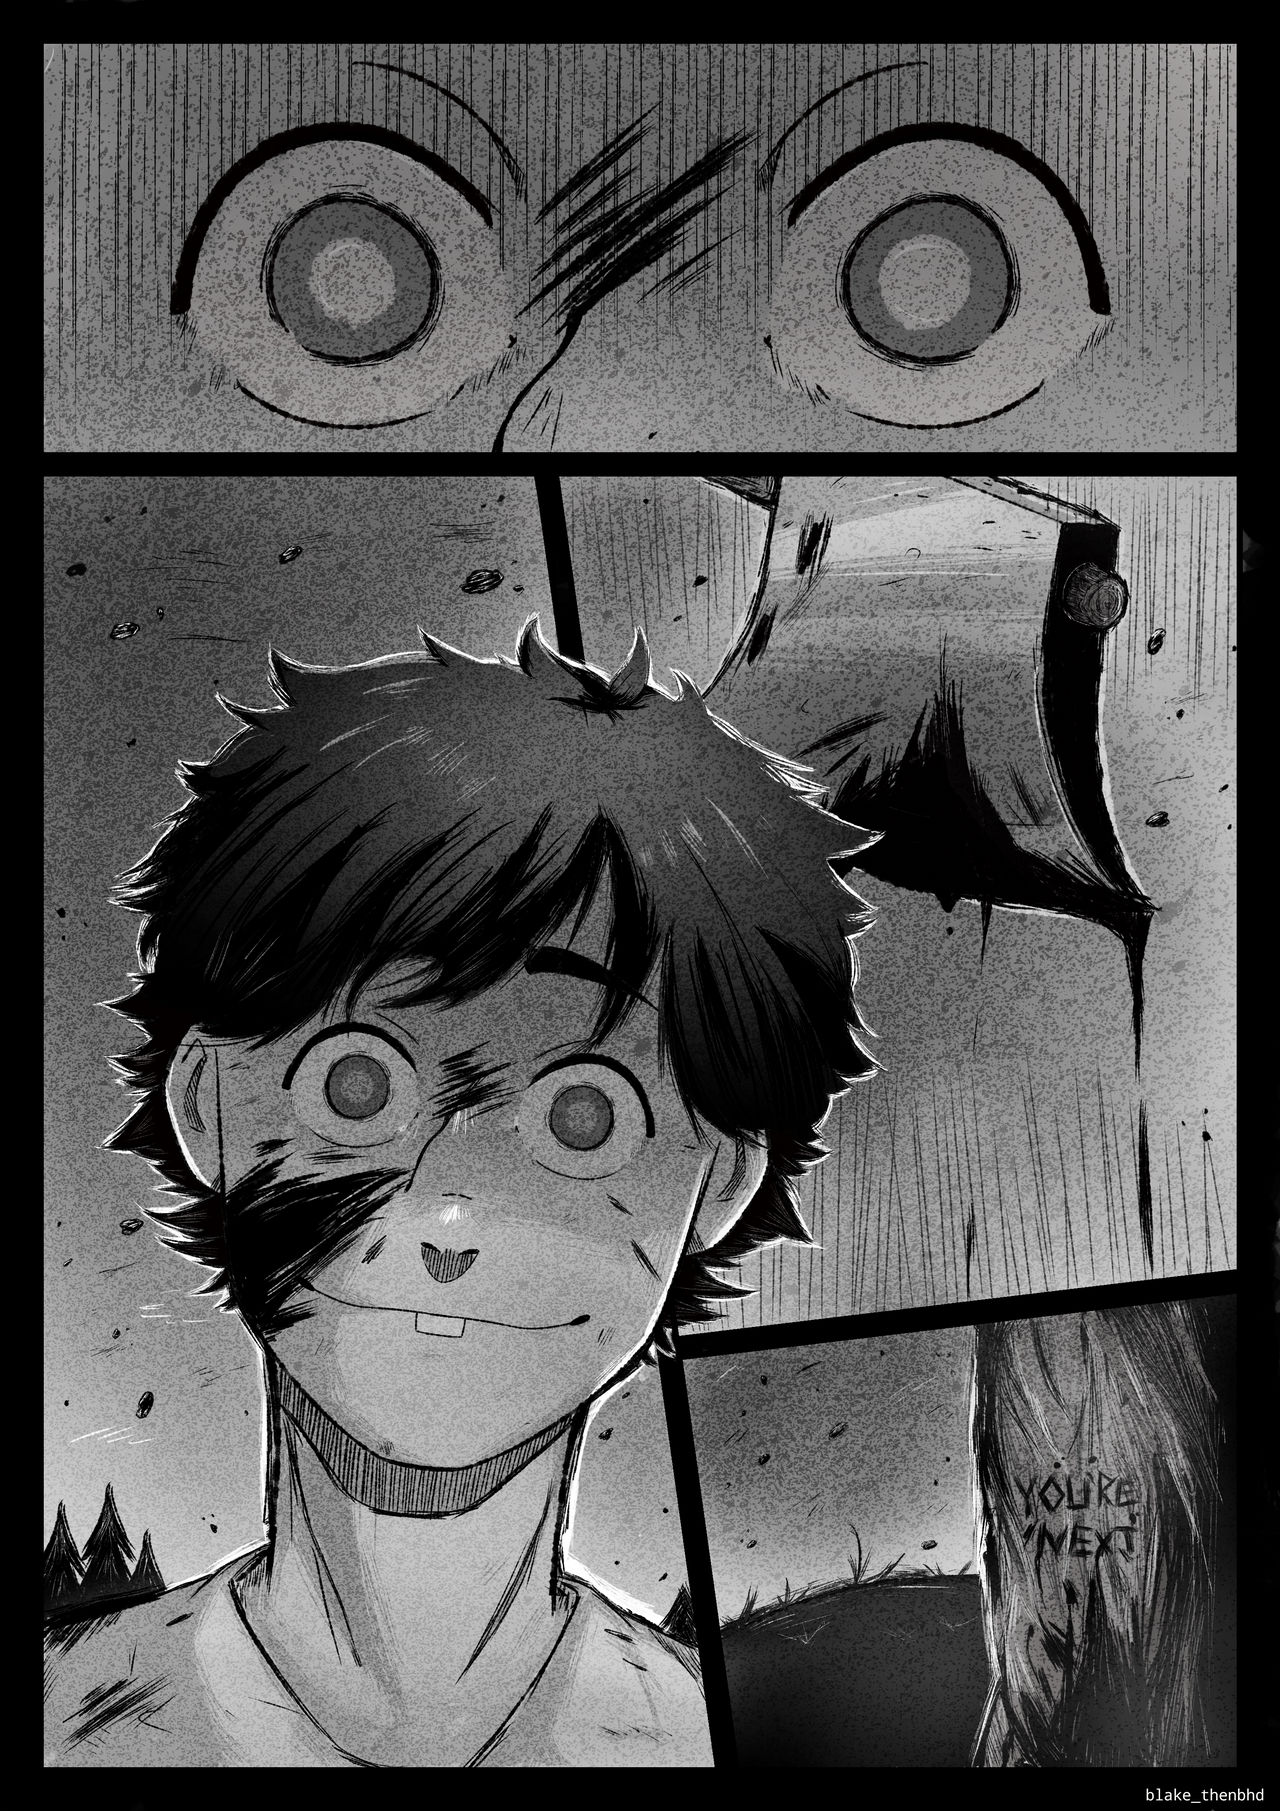 Toss Boy Horror Manga ( Finished May 3rd 2020 ) by C0smicDraws on DeviantArt